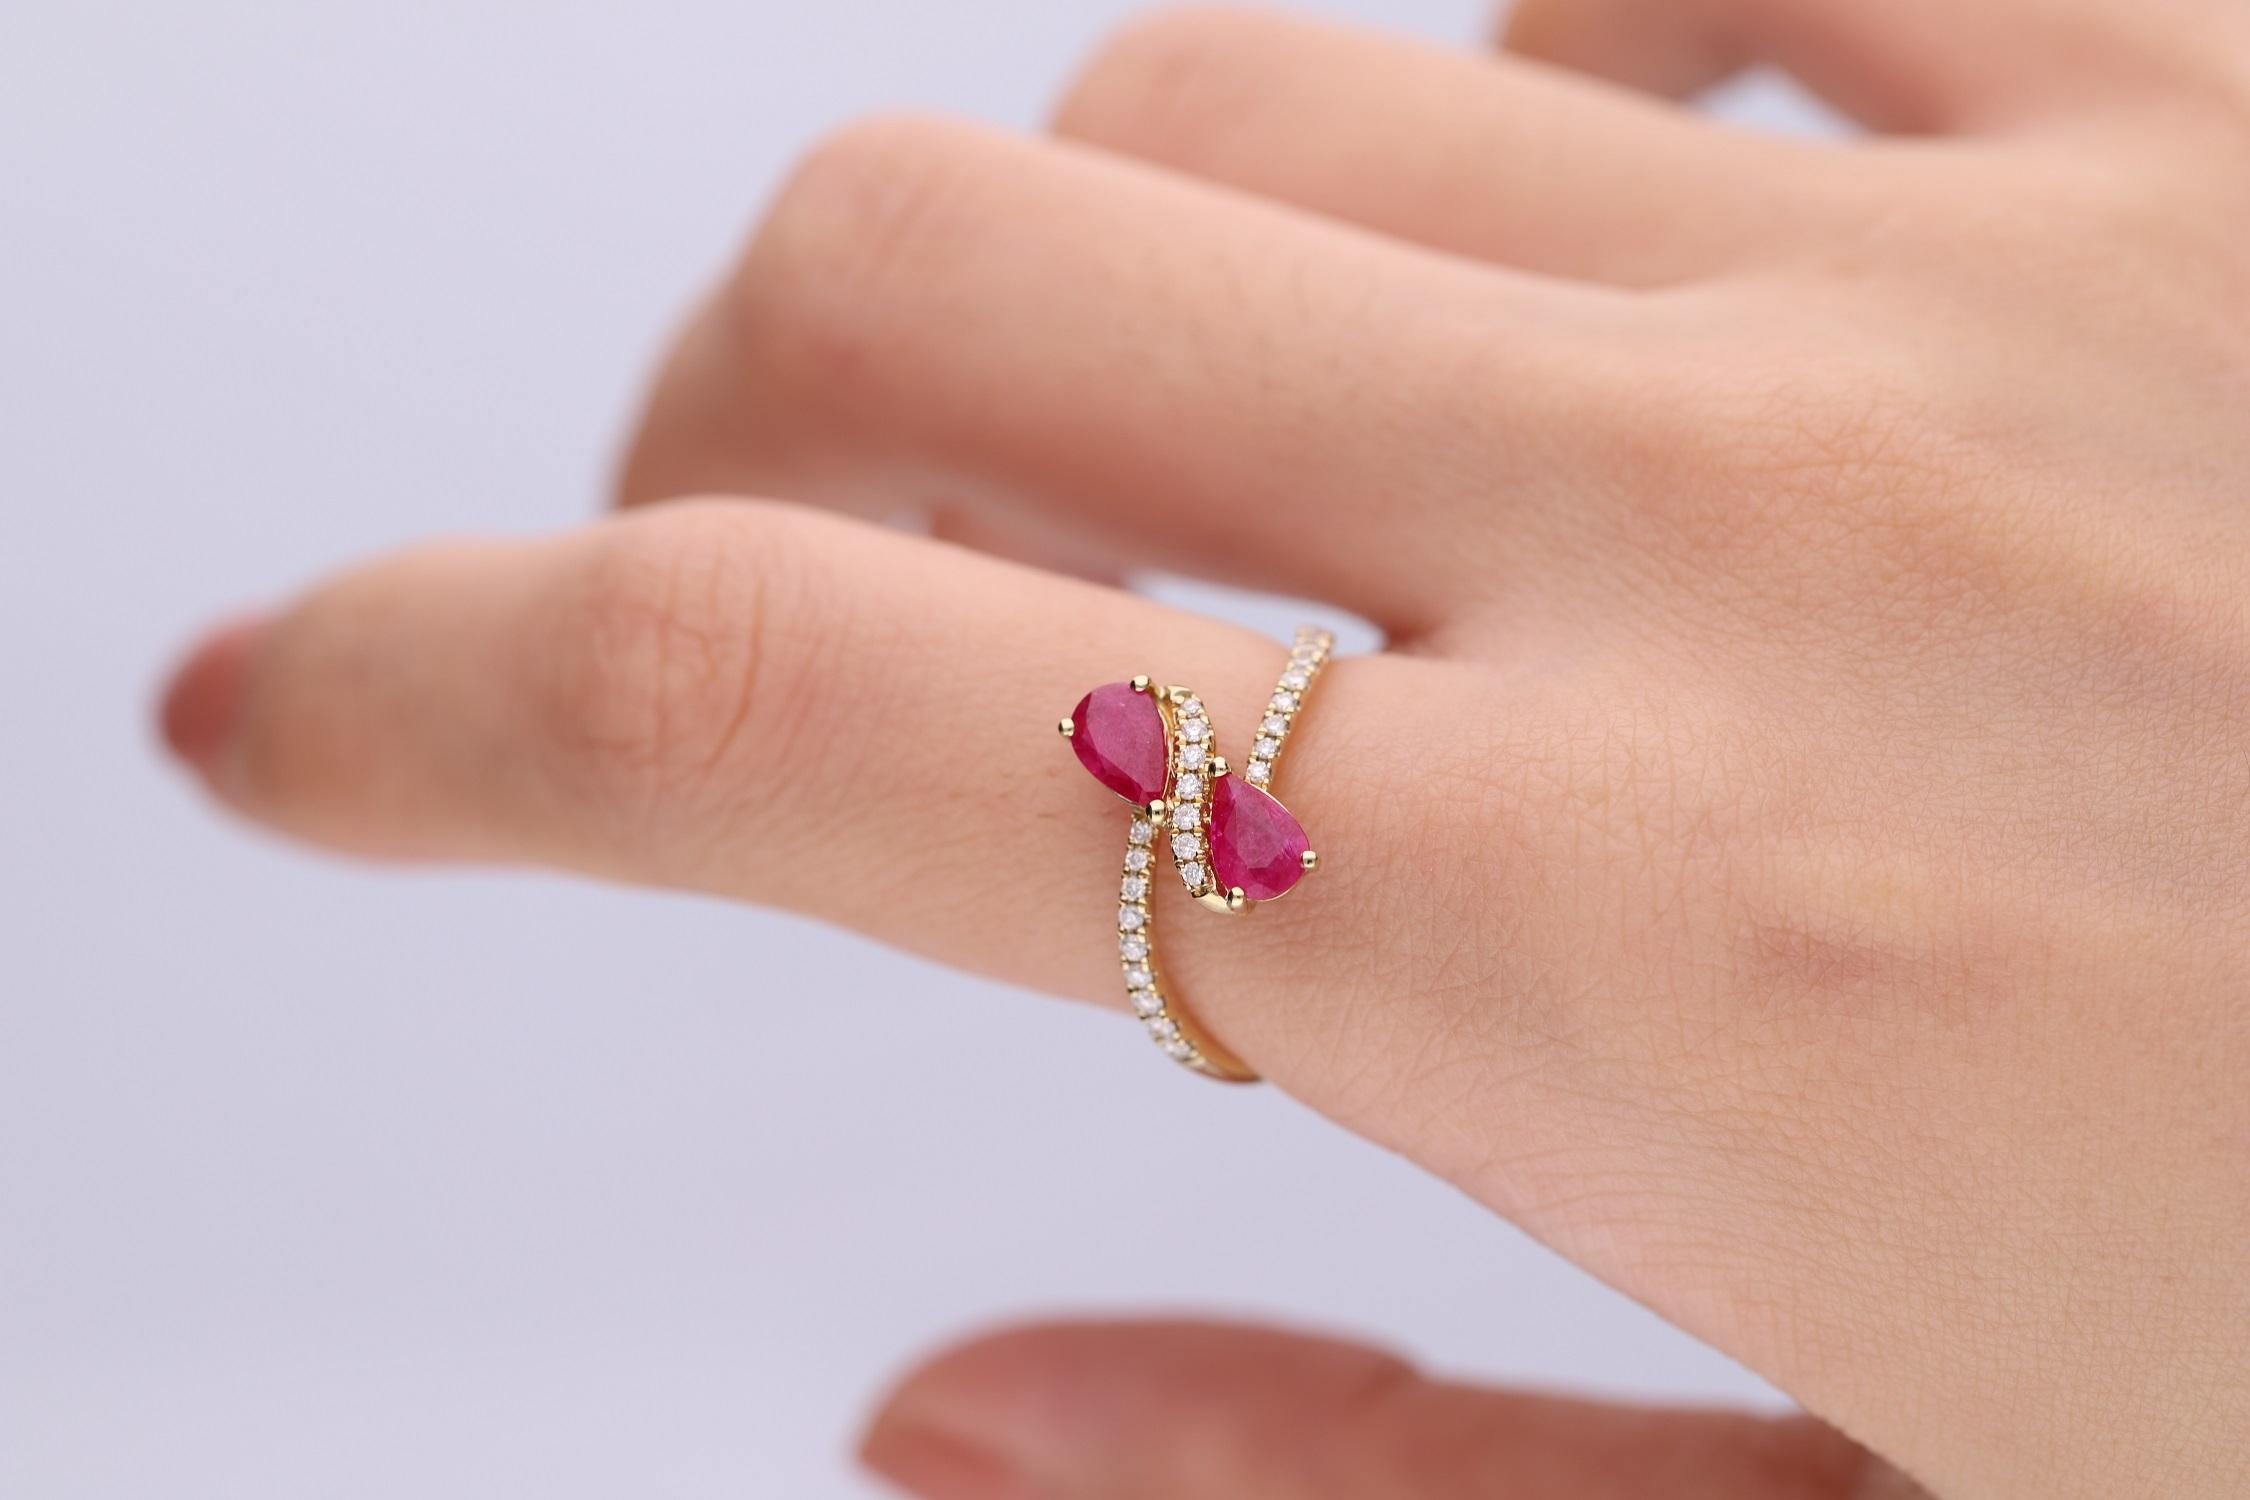 Stunning, timeless and classy eternity Unique Ring. Decorate yourself in luxury with this Gin & Grace Ring. The 10K Yellow Gold jewelry boasts with Pear-cut 2 pcs 0.88 carat Ruby and Natural Round-cut white Diamond (25 Pcs) 0.17 Carat accent stones